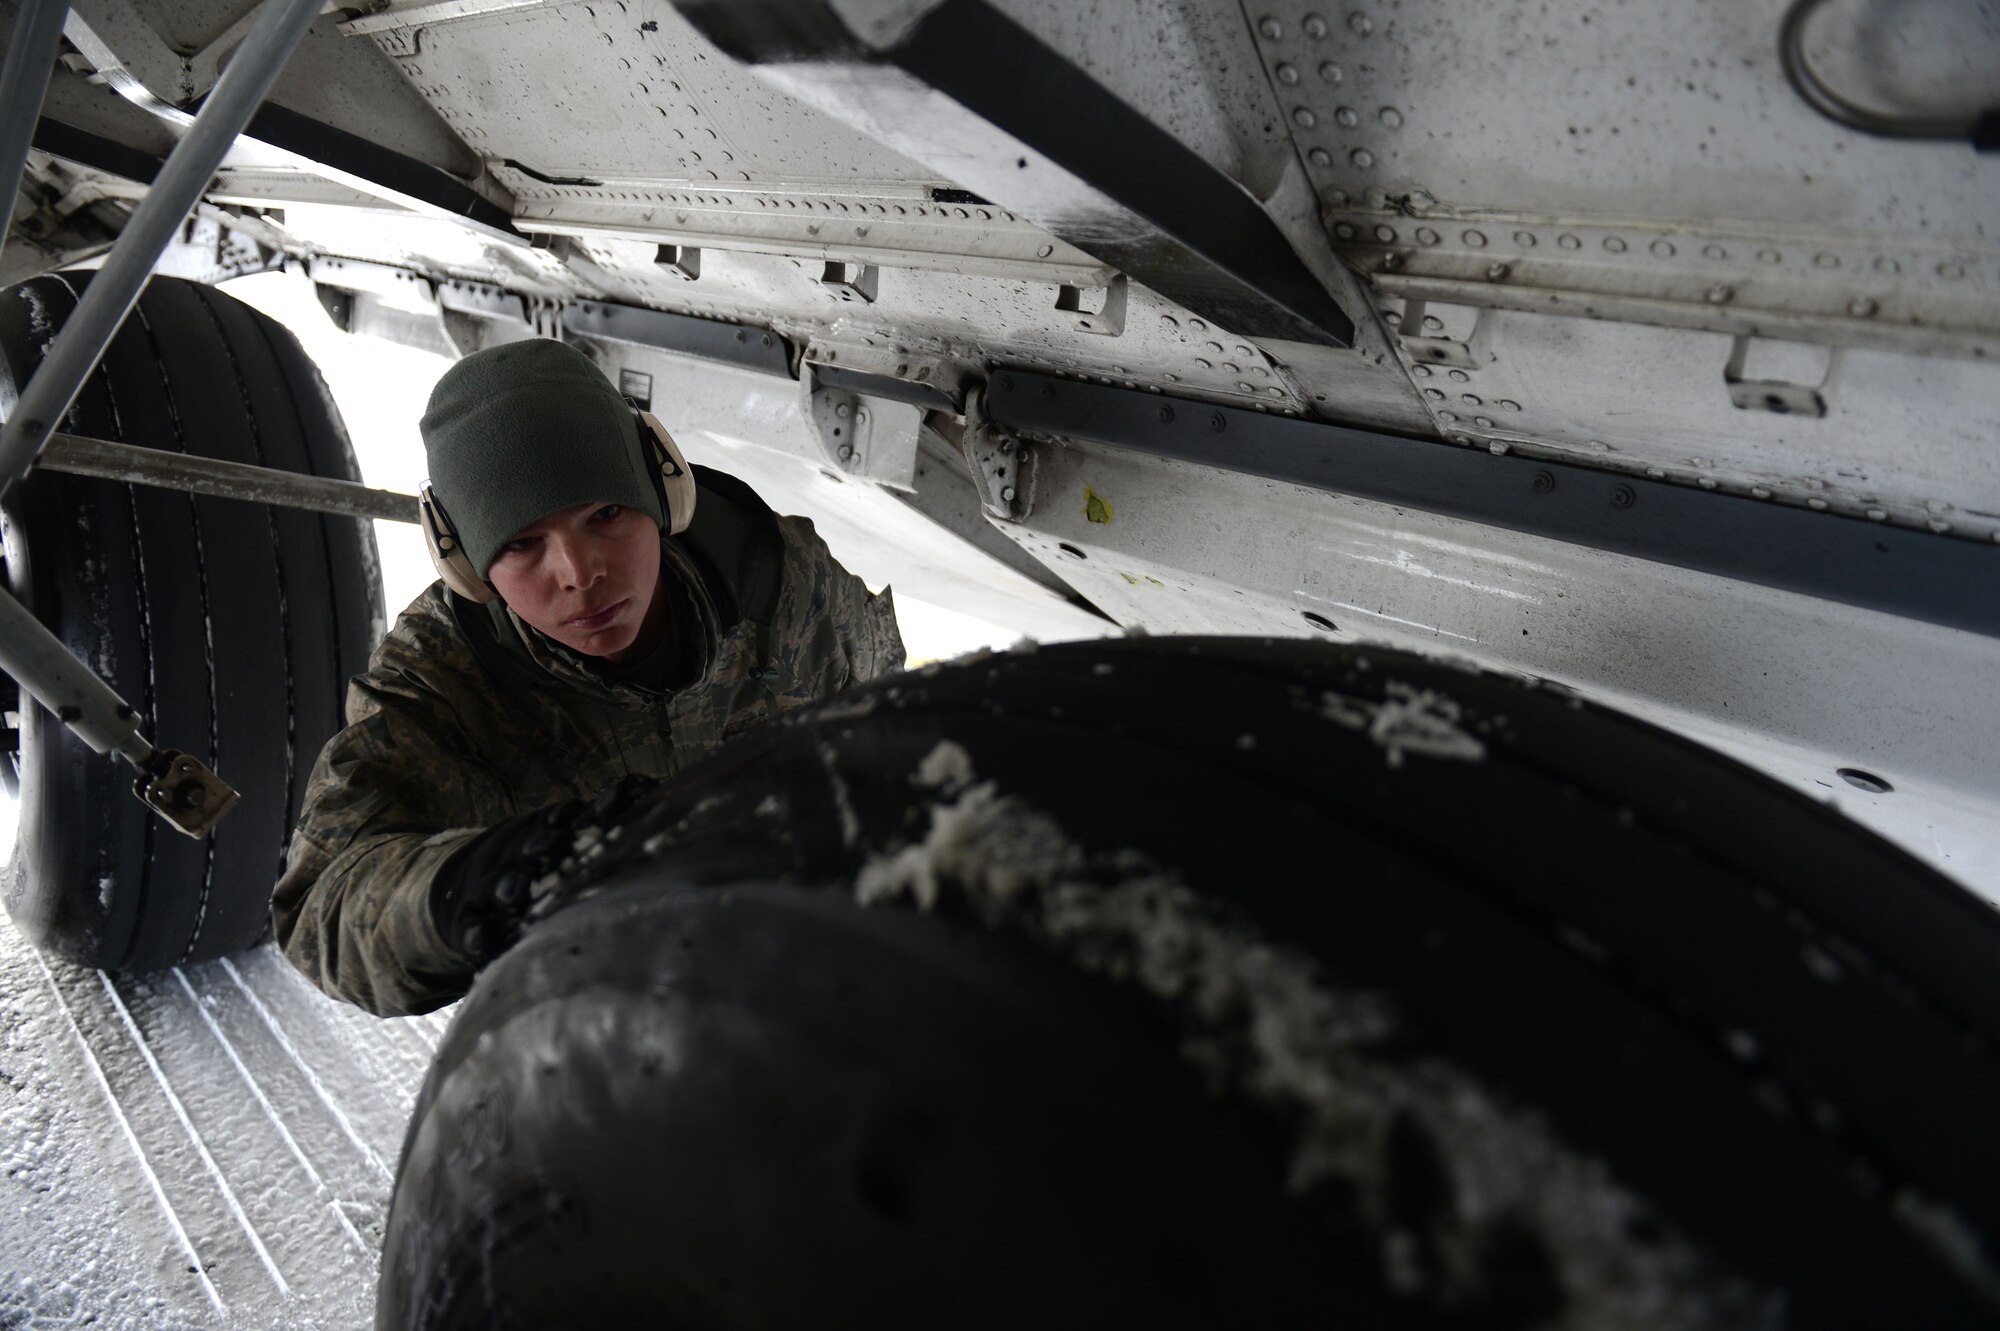 SPANGDAHLEM AIR BASE, Germany – U.S. Air Force Airman 1st Class Michael Bosch, 446th Aircraft Maintenance Squadron crew chief from Fedoa, Wash., checks the tires on a C-17 Globemaster III March 13, 2013. The 446th AMXS is assisting the 726th Air Mobility Squadron with airflow during a two-week temporary duty. (U.S. Air Force photo by Airman 1st Class Gustavo Castillo/Released) 